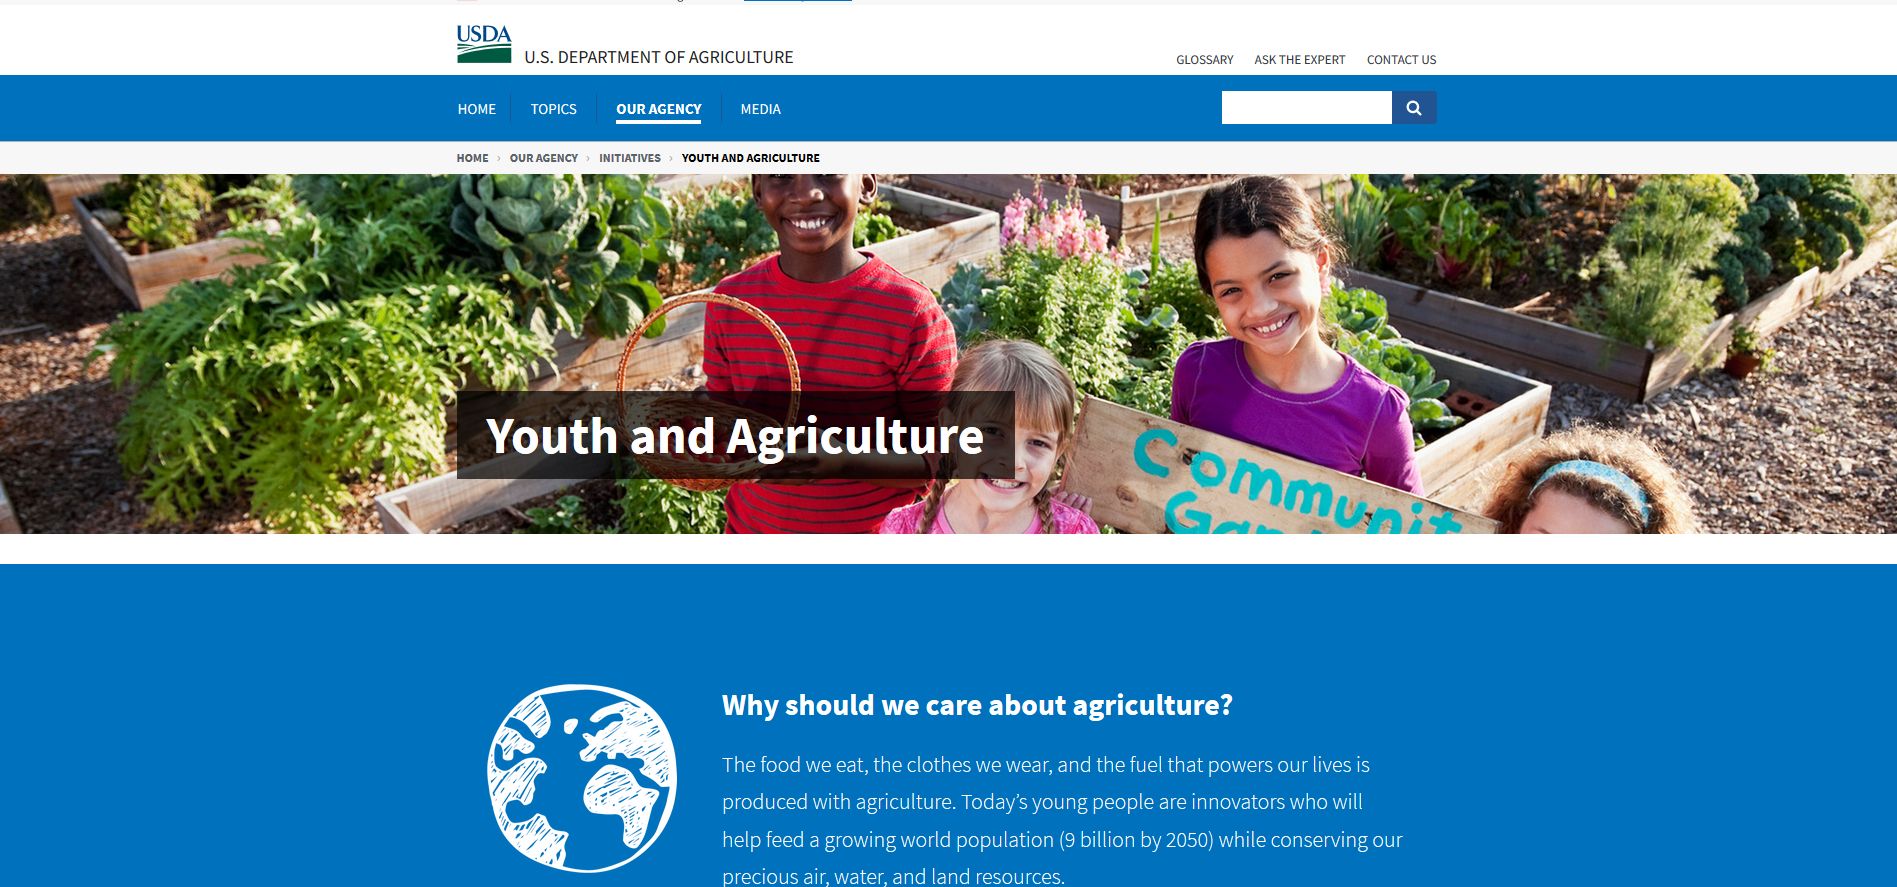 The U.S. Department of Agriculture joins the nation in celebrating National Ag Day, which highlights agriculture’s crucial role in everyday life, and honors the farmers, foresters, scientists, producers and many others who contribute to America’s bountiful harvest. As part of this effort, USDA is launching a new Youth and Agriculture website to connect young people and youth-serving organizations with Department-wide resources that engage, empower, and educate the next generation of agricultural leaders.